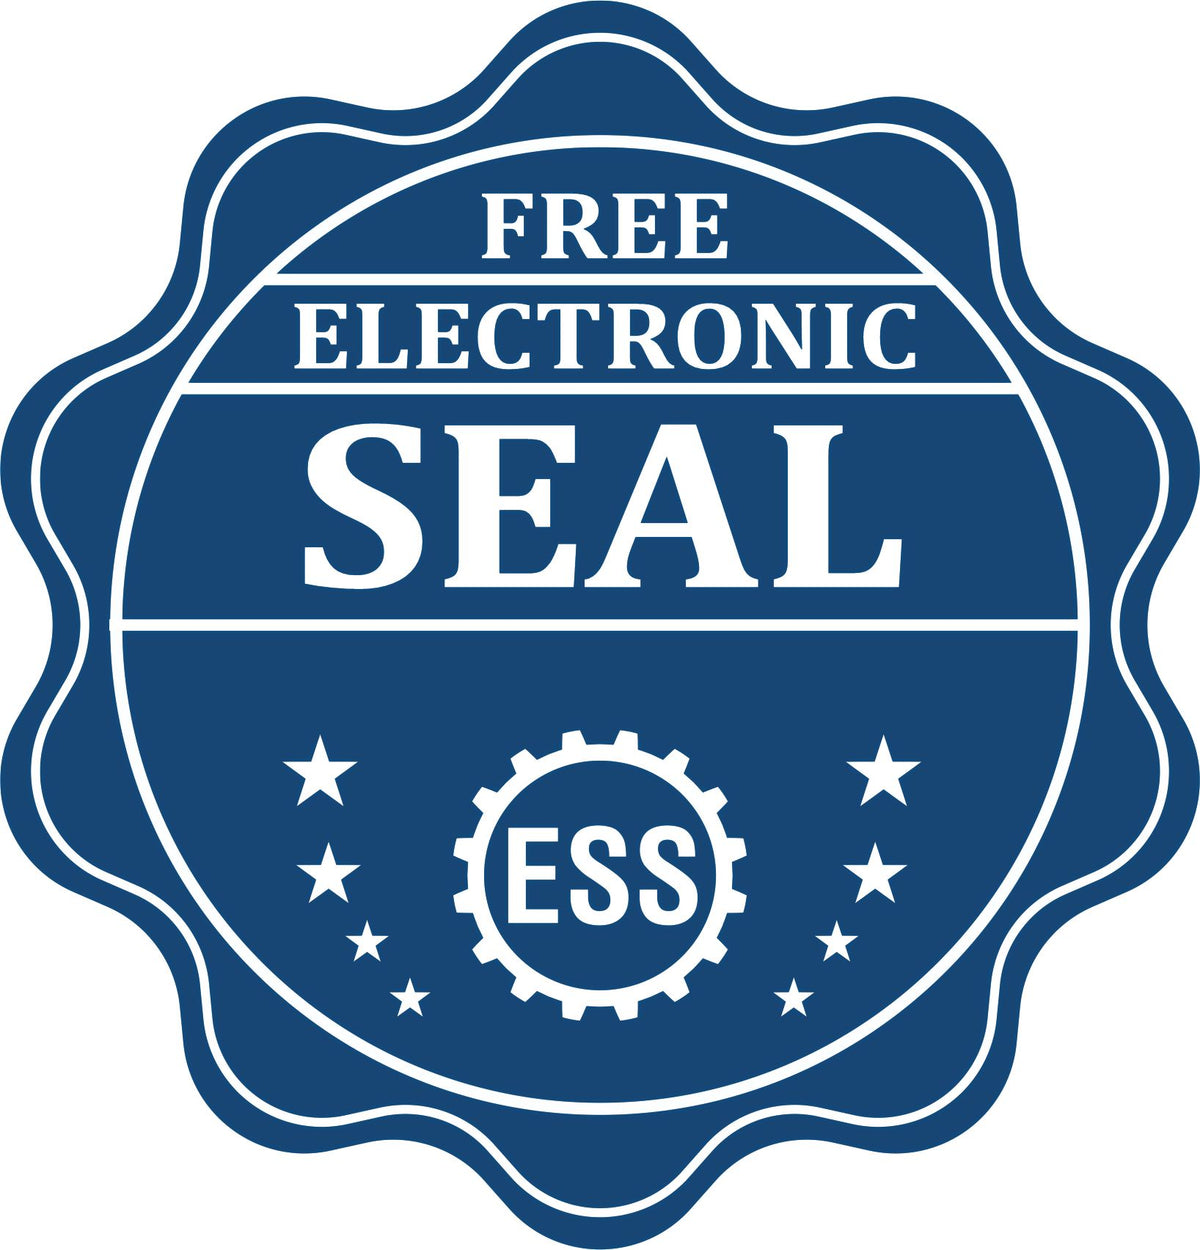 A badge showing a free electronic seal for the Soft Alaska Professional Geologist Seal with stars and the ESS gear on the emblem.